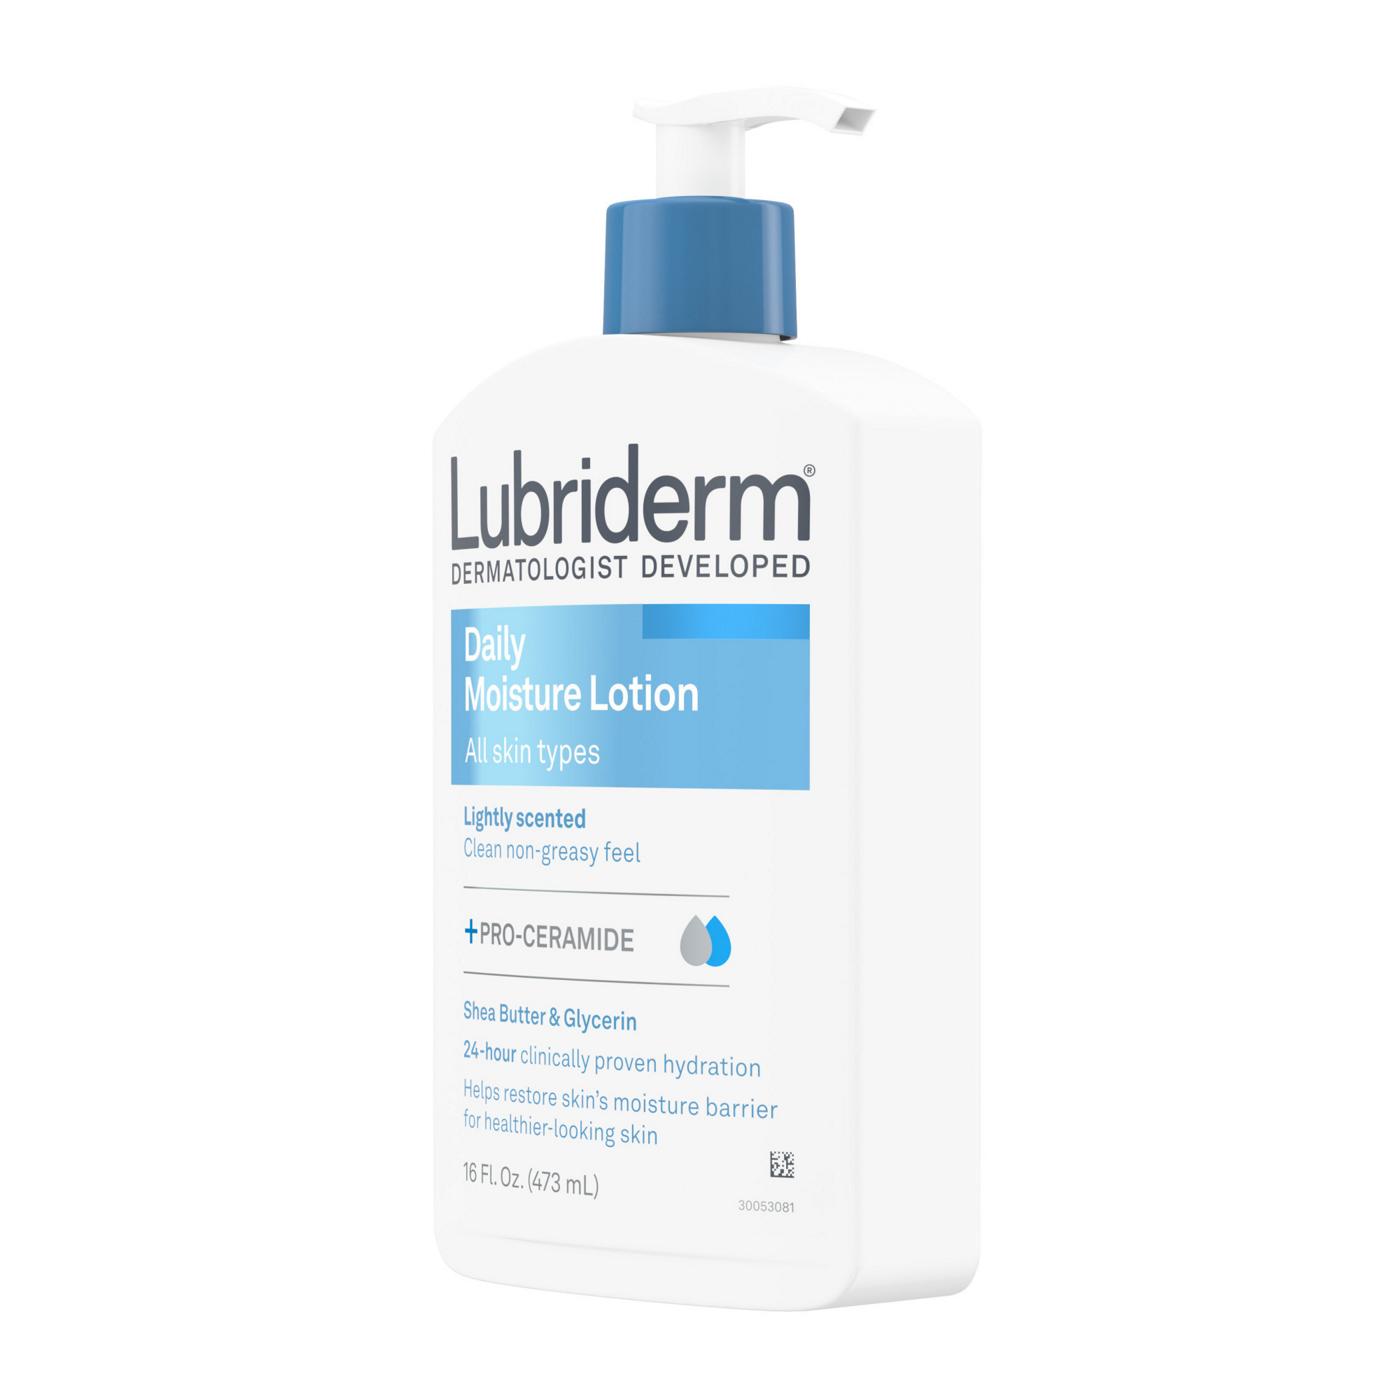 Lubriderm Daily Moisture Lotion; image 8 of 9